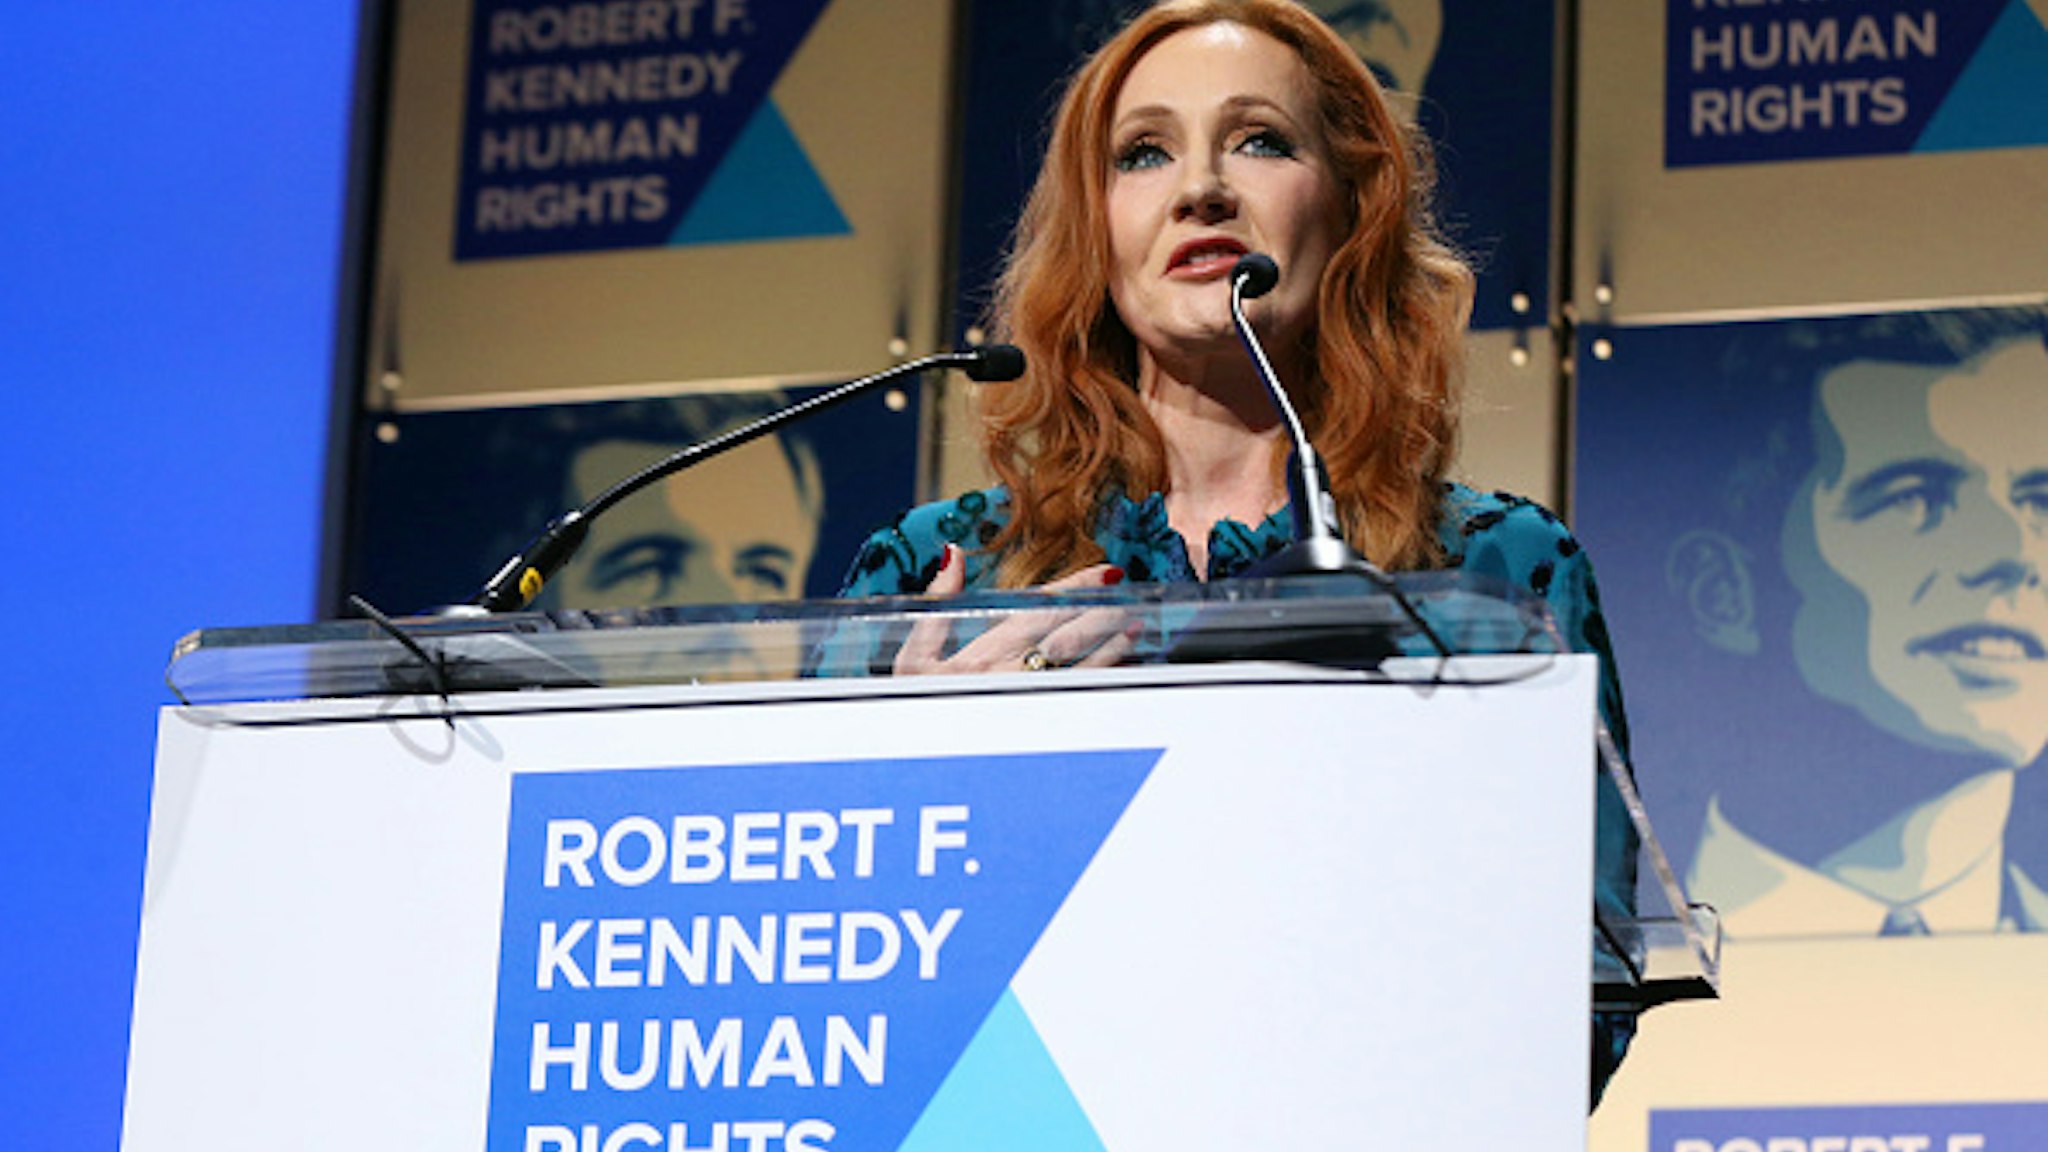 NEW YORK, NEW YORK - DECEMBER 12: J.K. Rowling accepts an award onstage during the Robert F. Kennedy Human Rights Hosts 2019 Ripple Of Hope Gala &amp; Auction In NYC on December 12, 2019 in New York City.